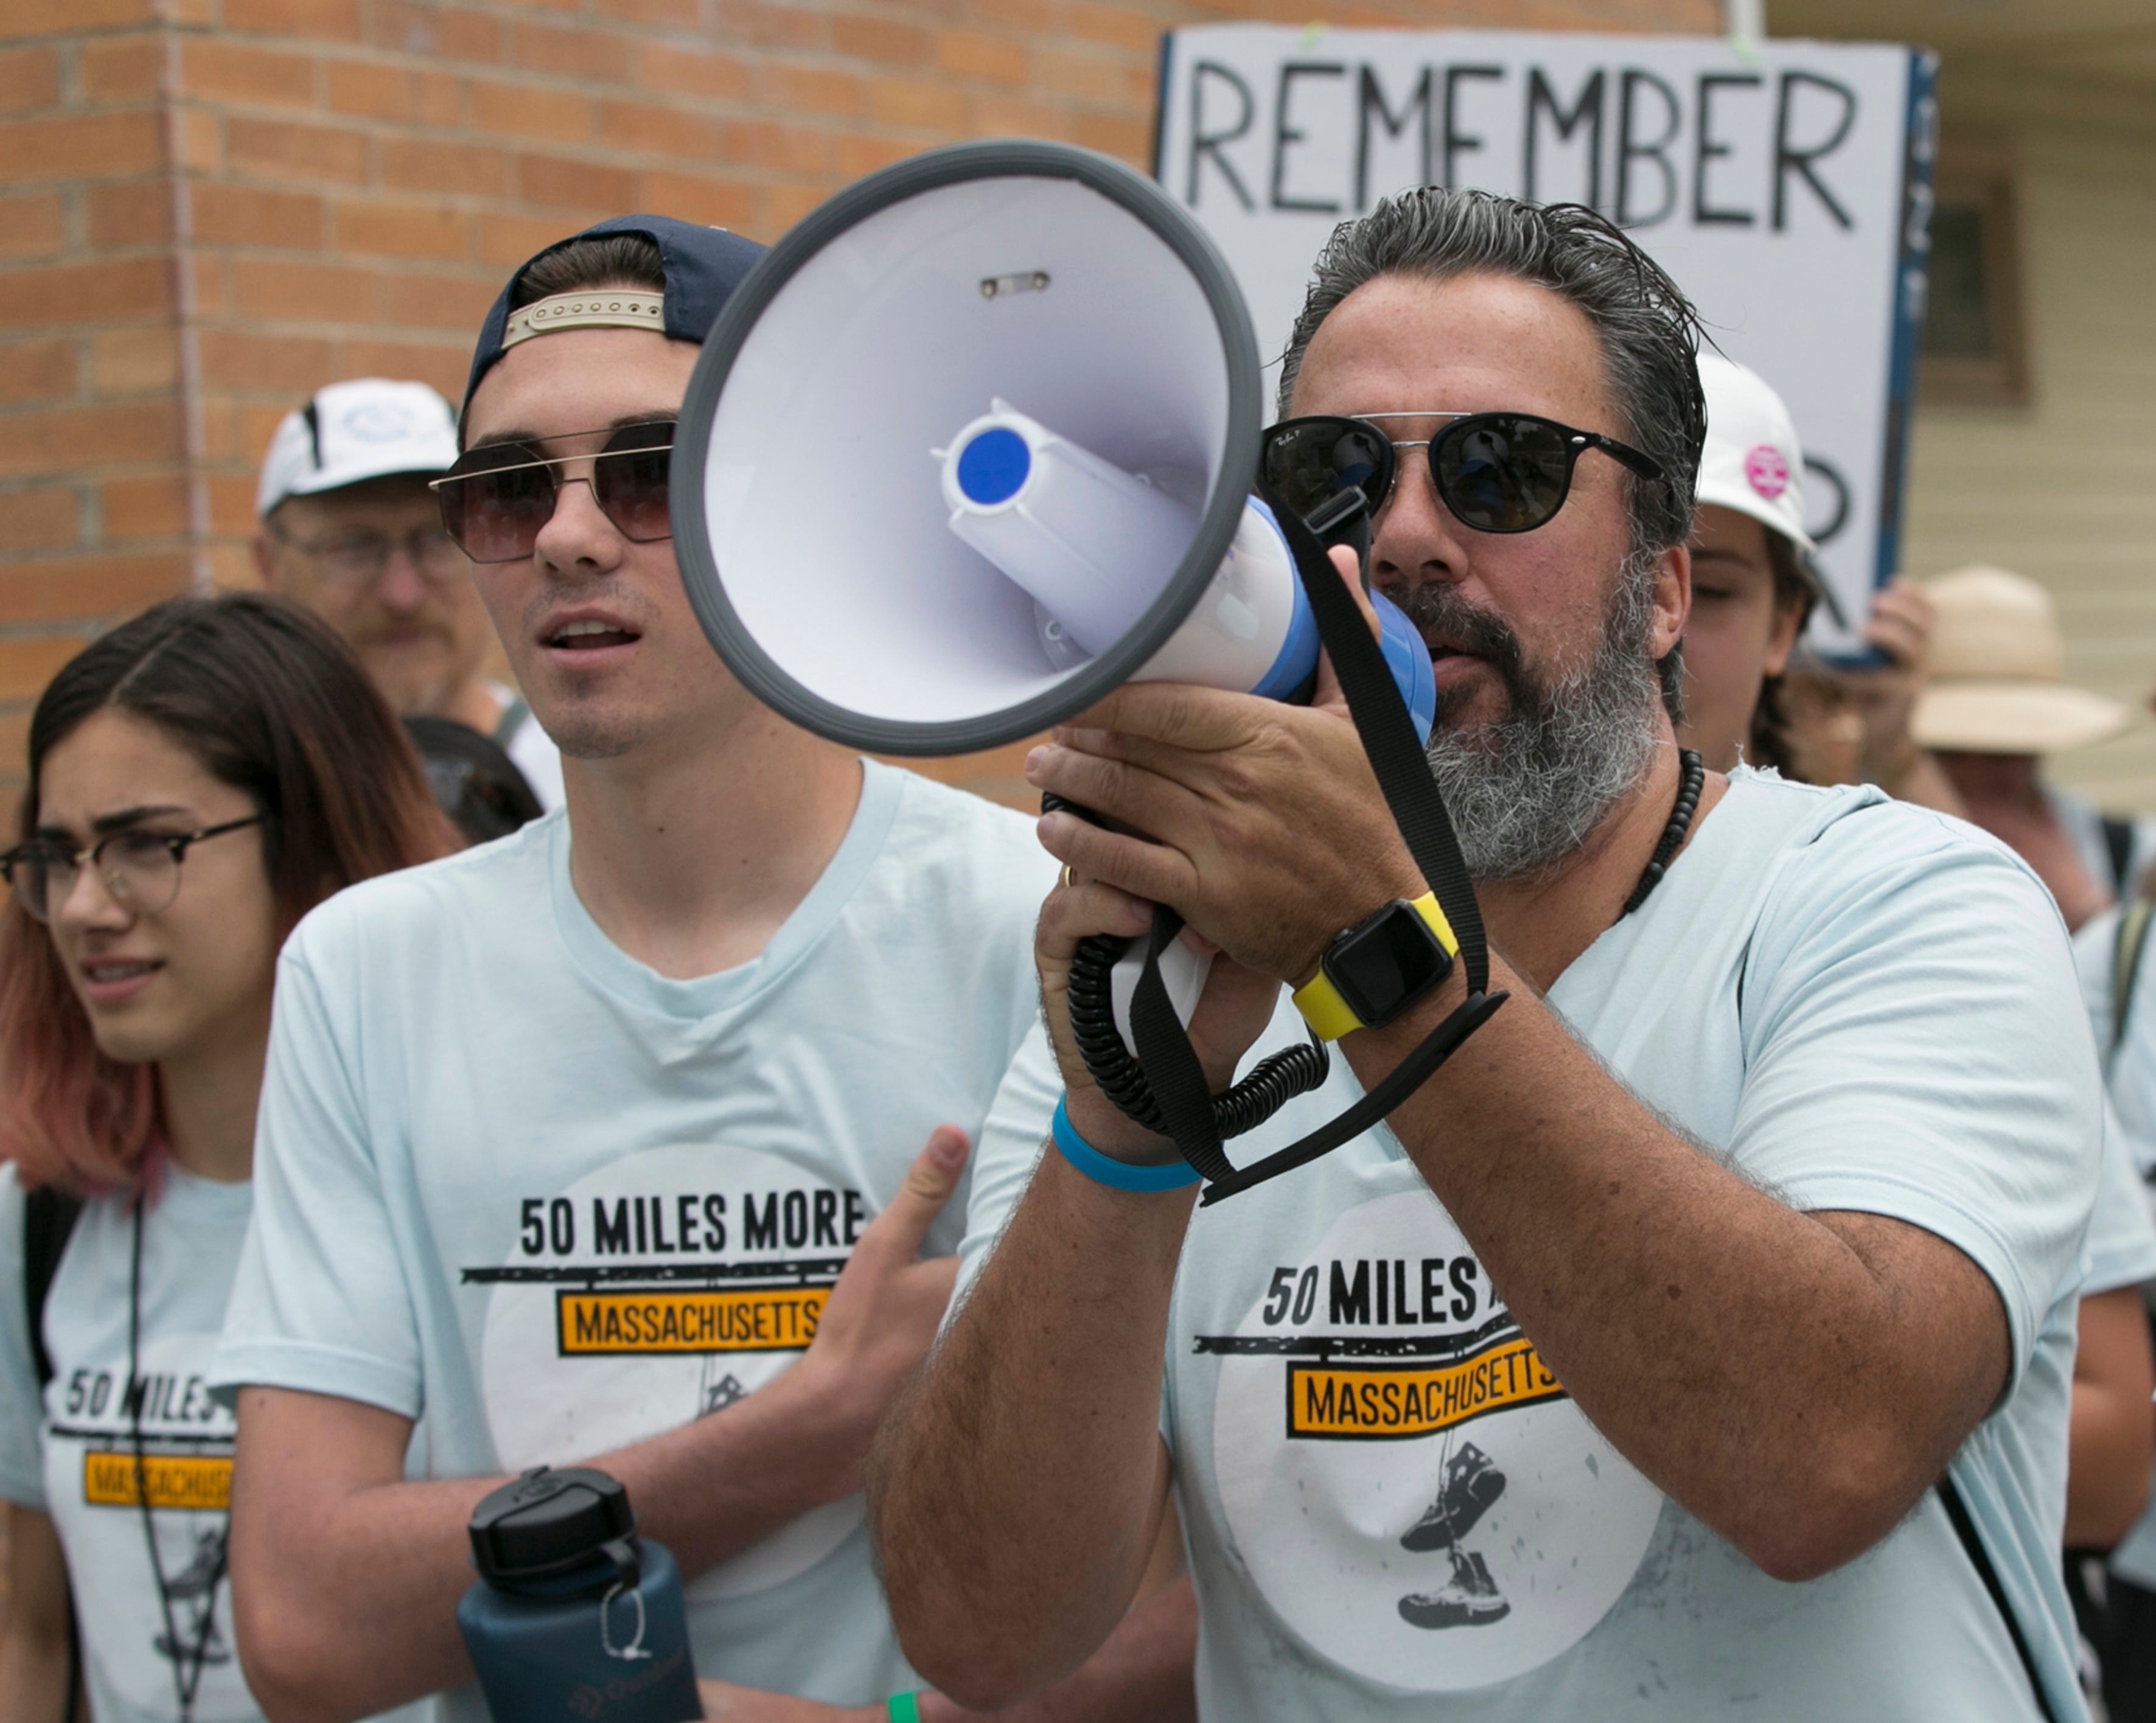 David Hogg (2-L), 18, a survivor of the Valentine's Day 2018 Parkland shooting and a resident of Parkland, Fla., is joined by Manuel Oliver (R), 50, father of murdered Parkland shooting victim Joaiquim Oliver, at a youth march to protest gun violence